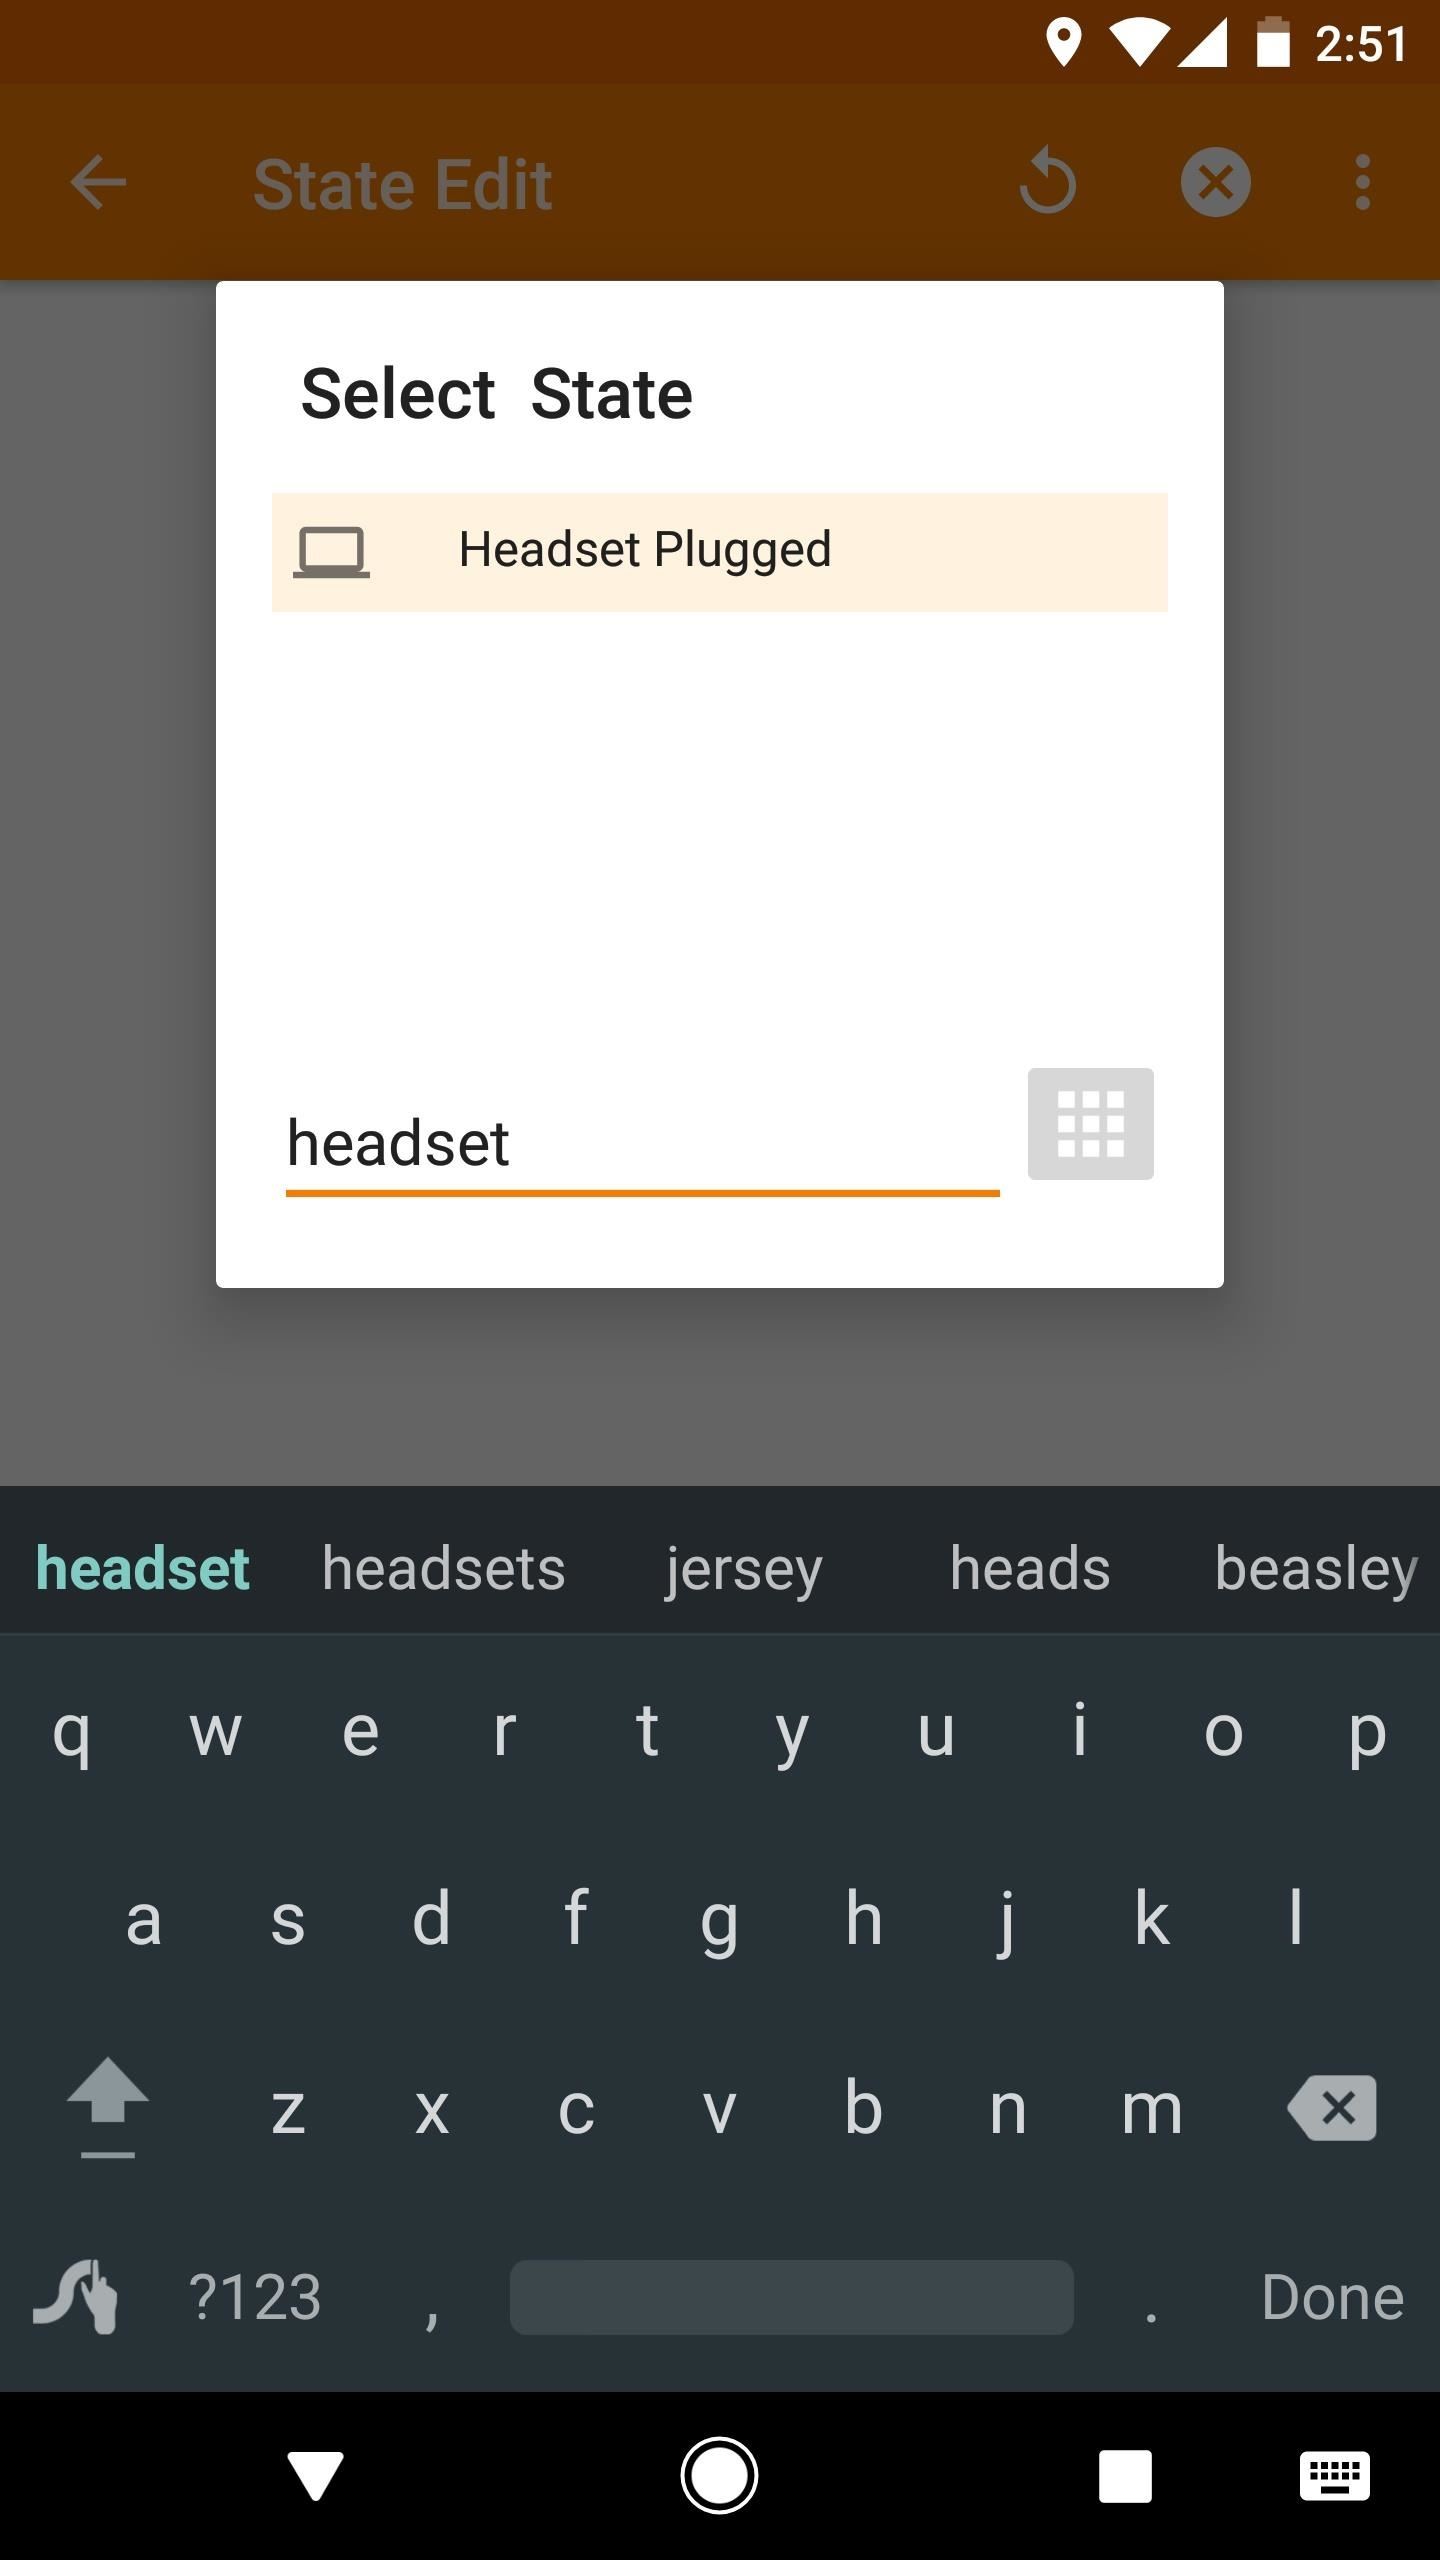 Tasker 101: 5 Useful Profiles to Help Get You Started with Android Automation